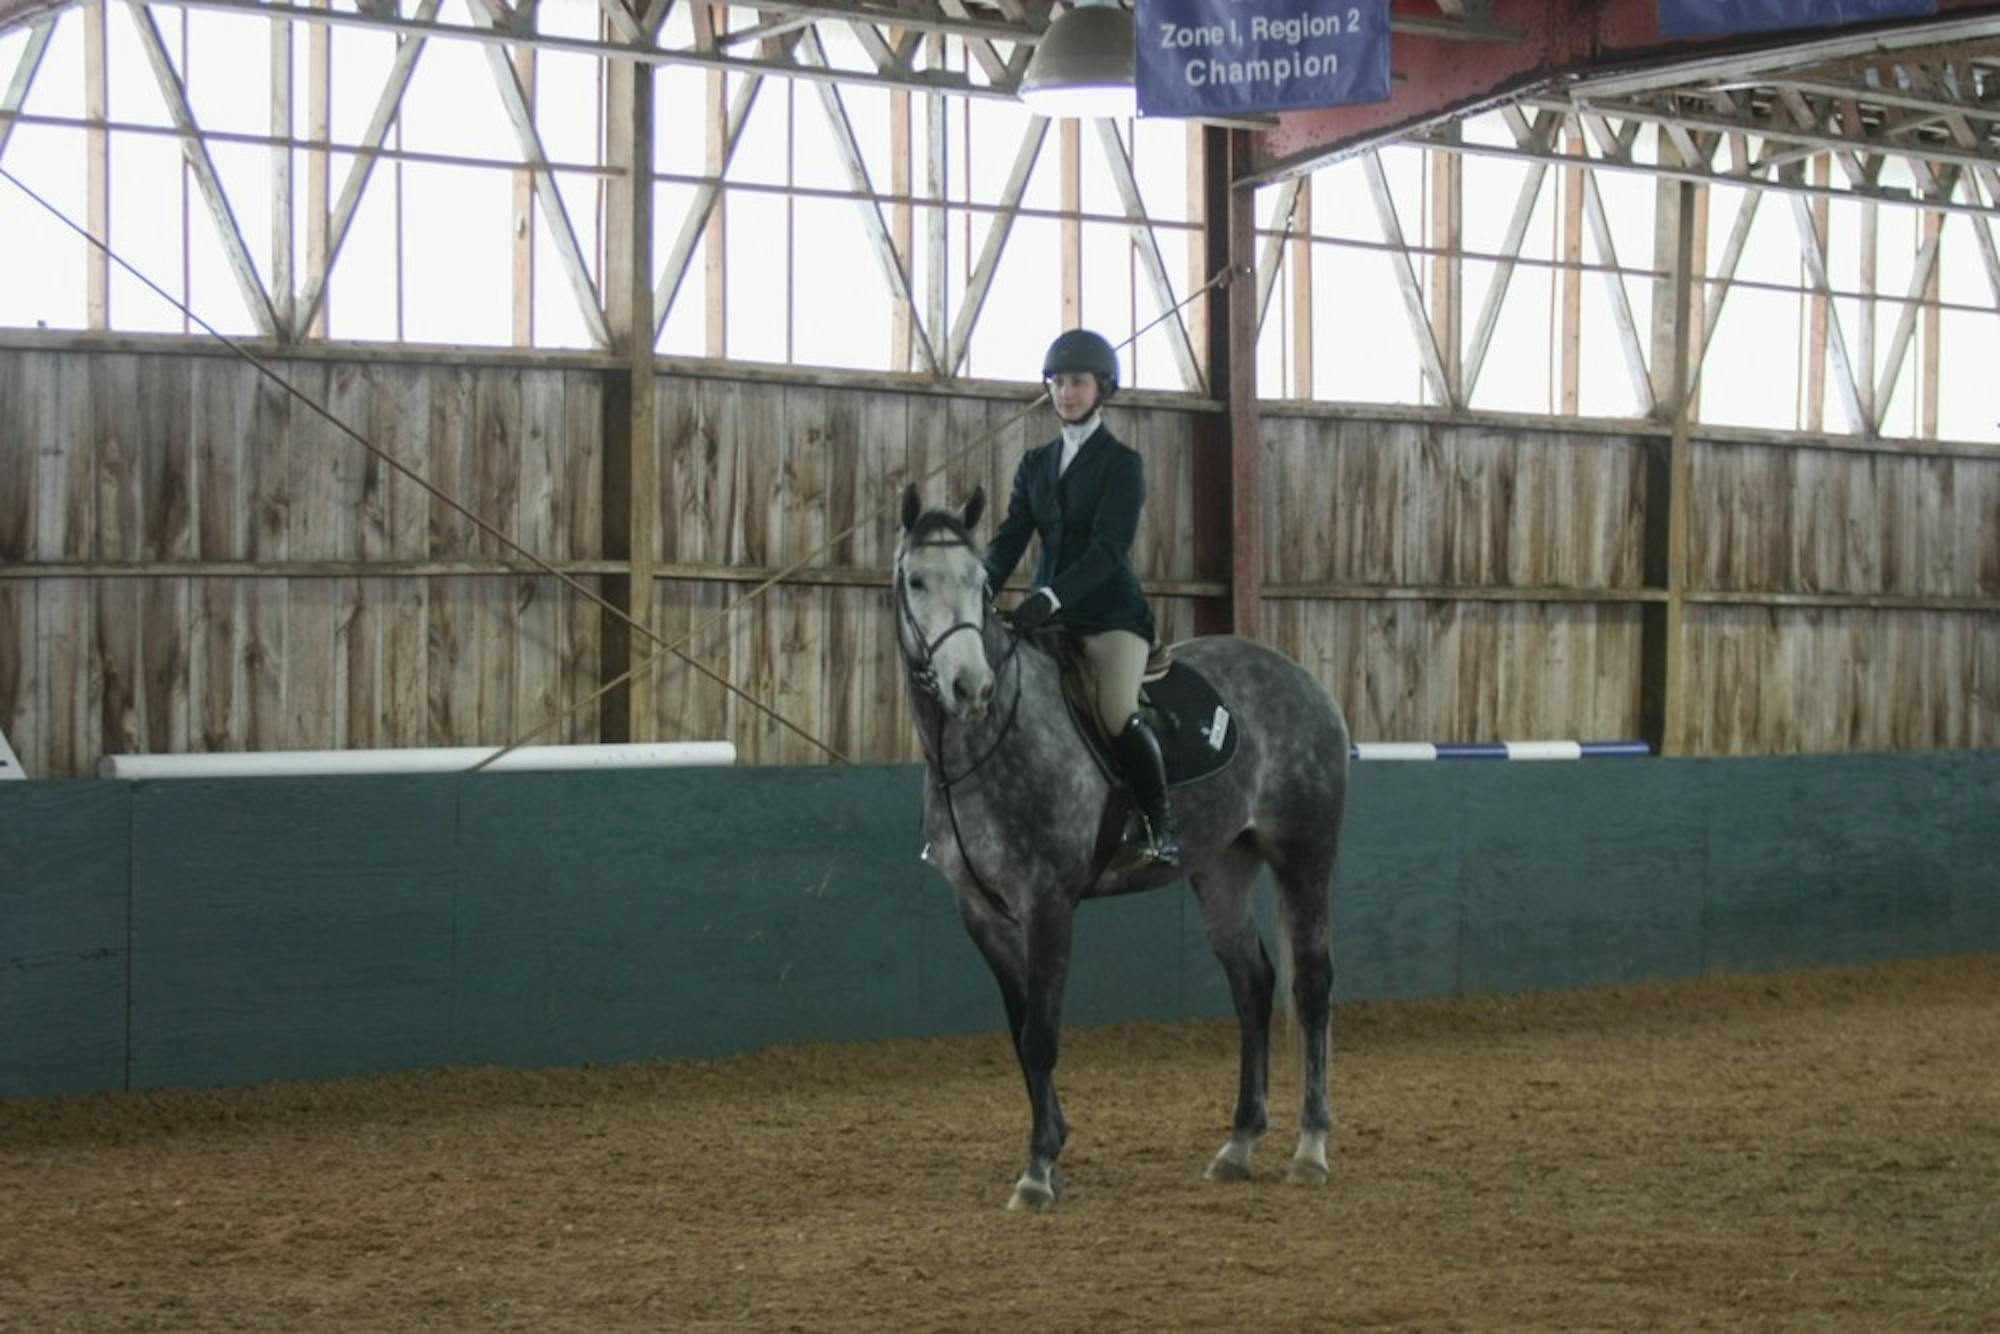 The equestrian team sent rides to the National Championships for the second year in a row.